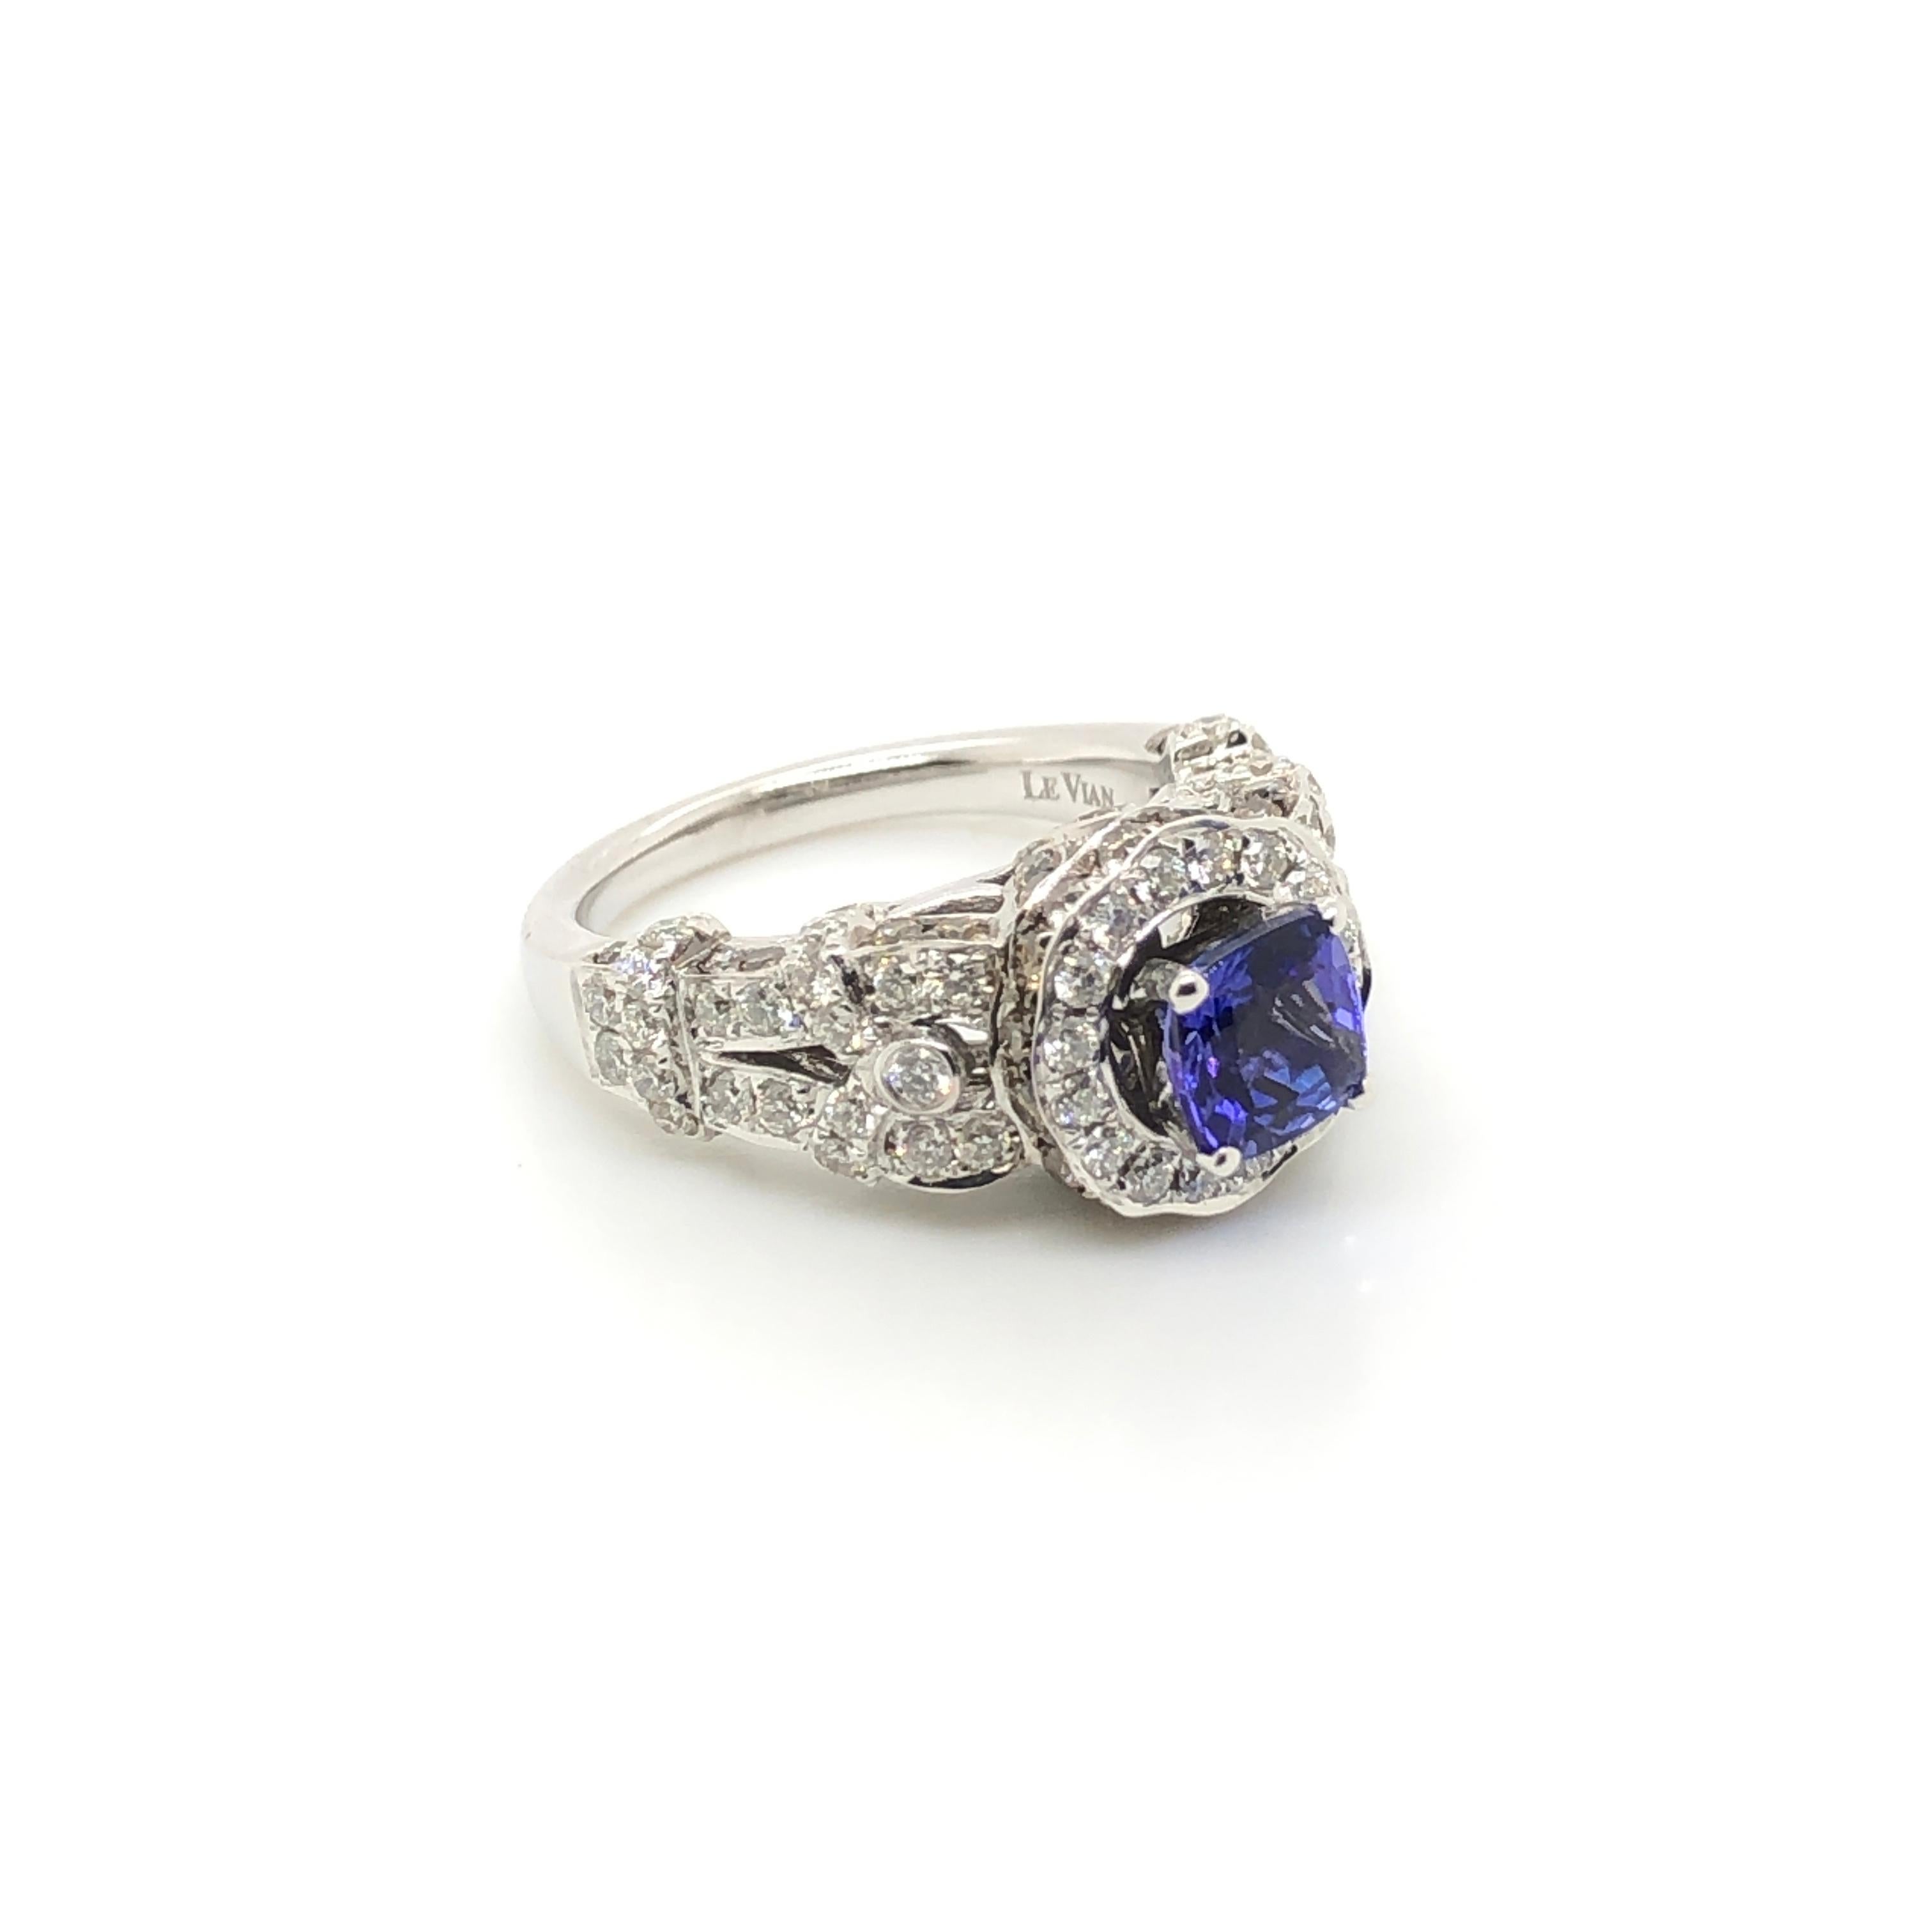 A stunning 1-1/4 carat Tanzanite rests atop the gorgeous high profile setting of this 14k white gold Le Vian Bridal ring featuring 7/8 ct. tw Chocolate Diamonds accents on the profile and 1 ct t.w. Vanilla Diamonds surrounding the center stone and